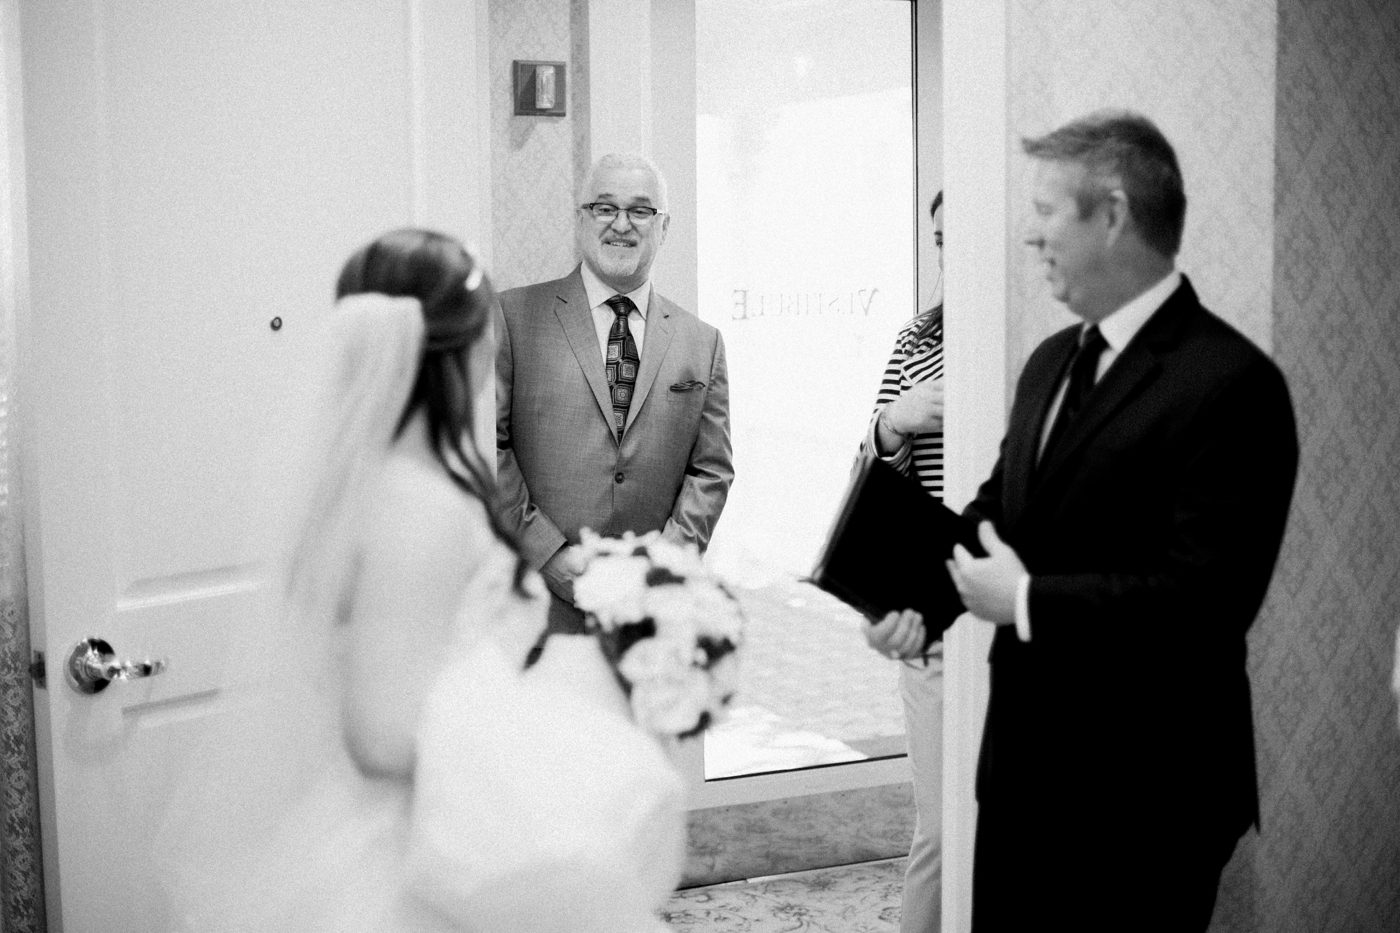 Father of the bride seeing her for the first time